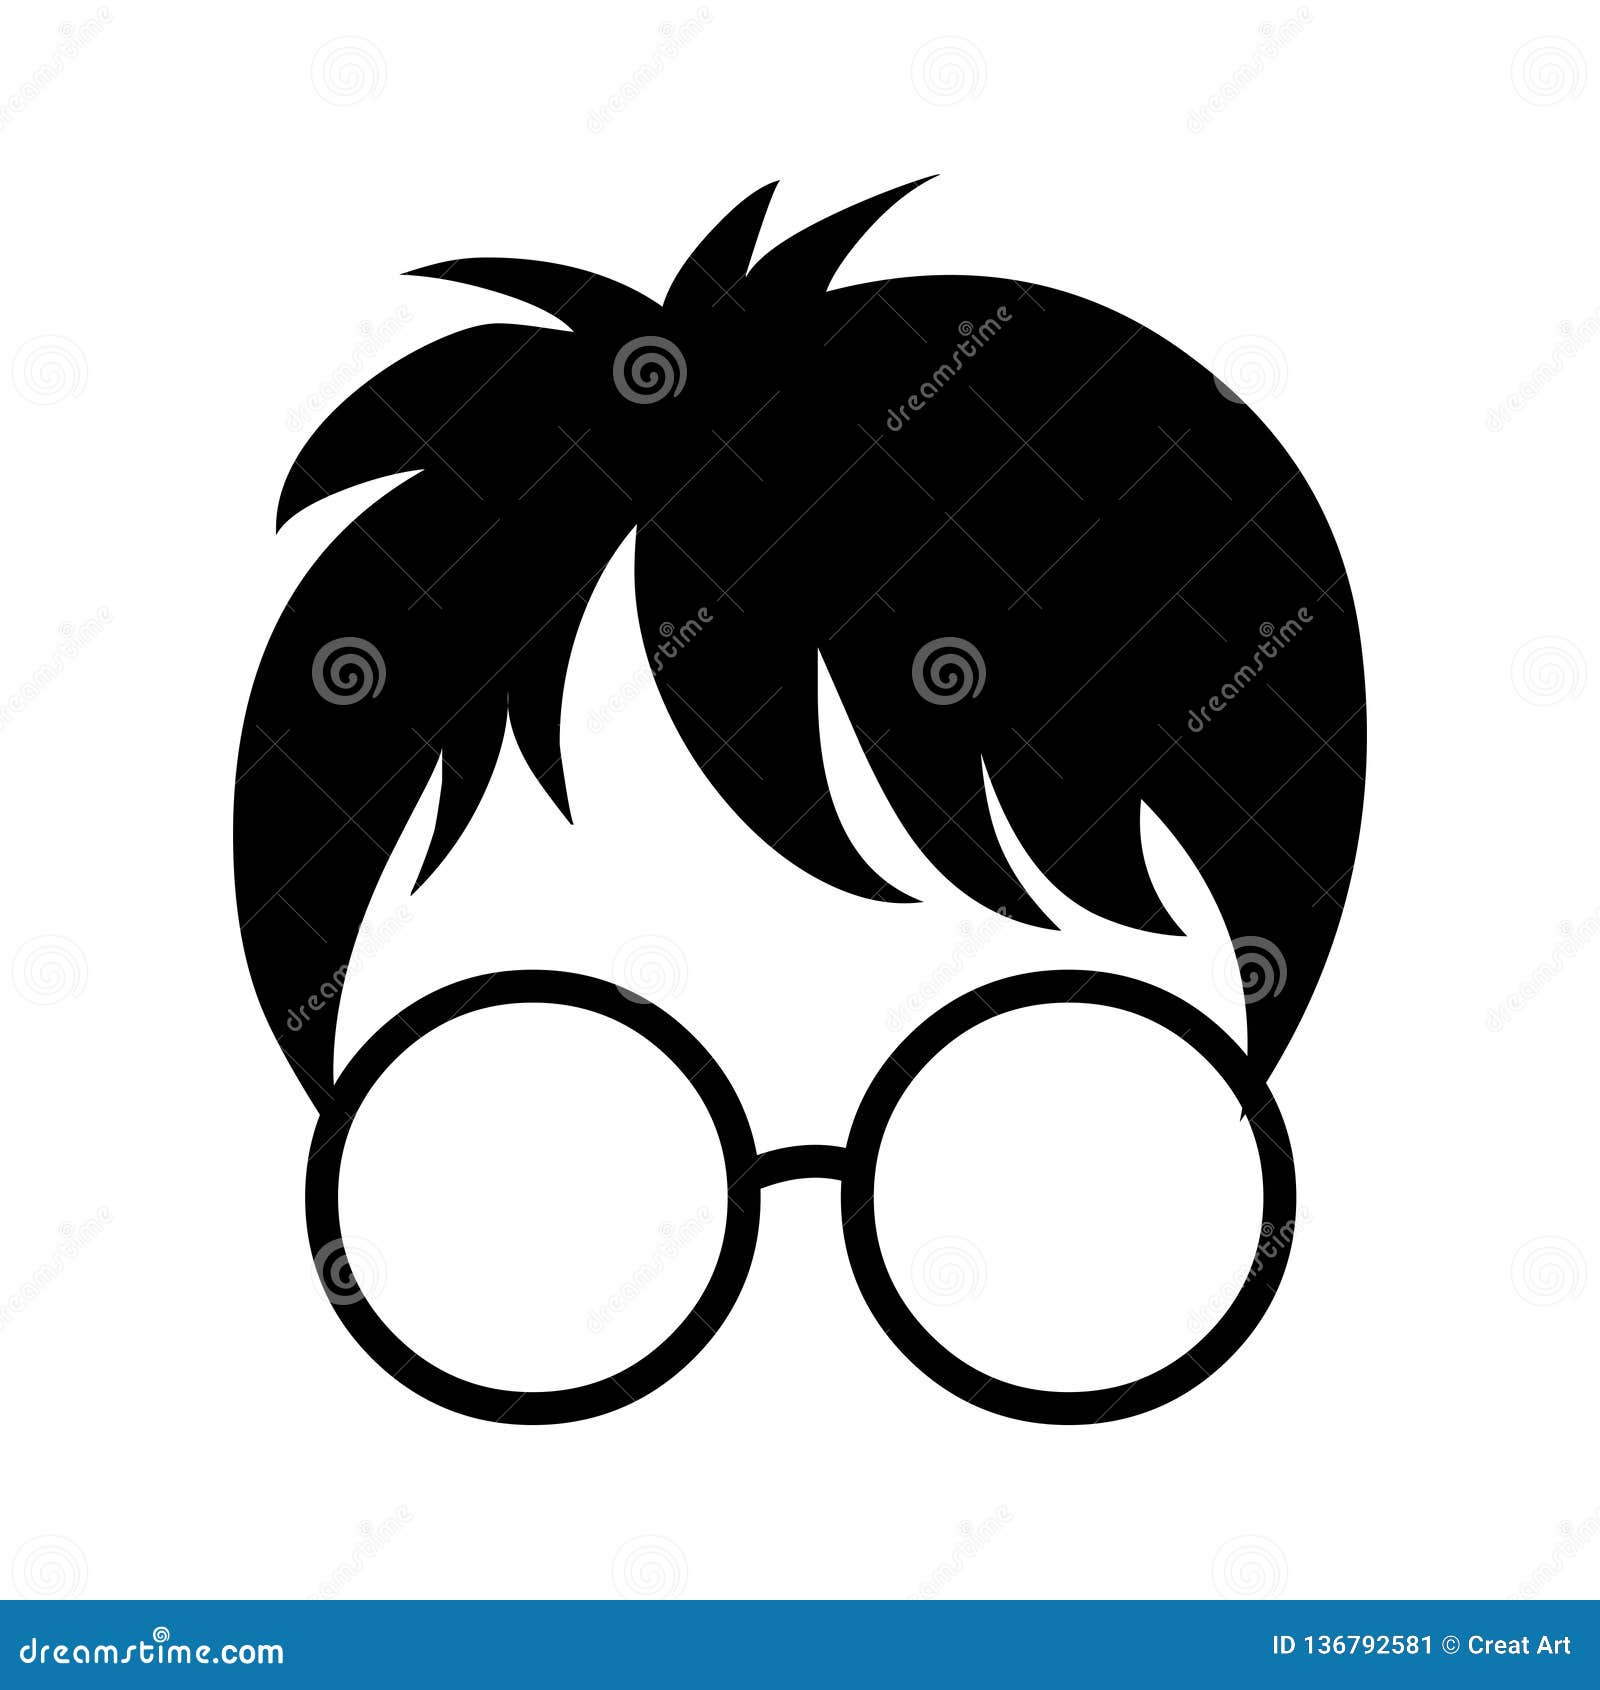 Harry Potter Logo and symbol, meaning, history, PNG, brand